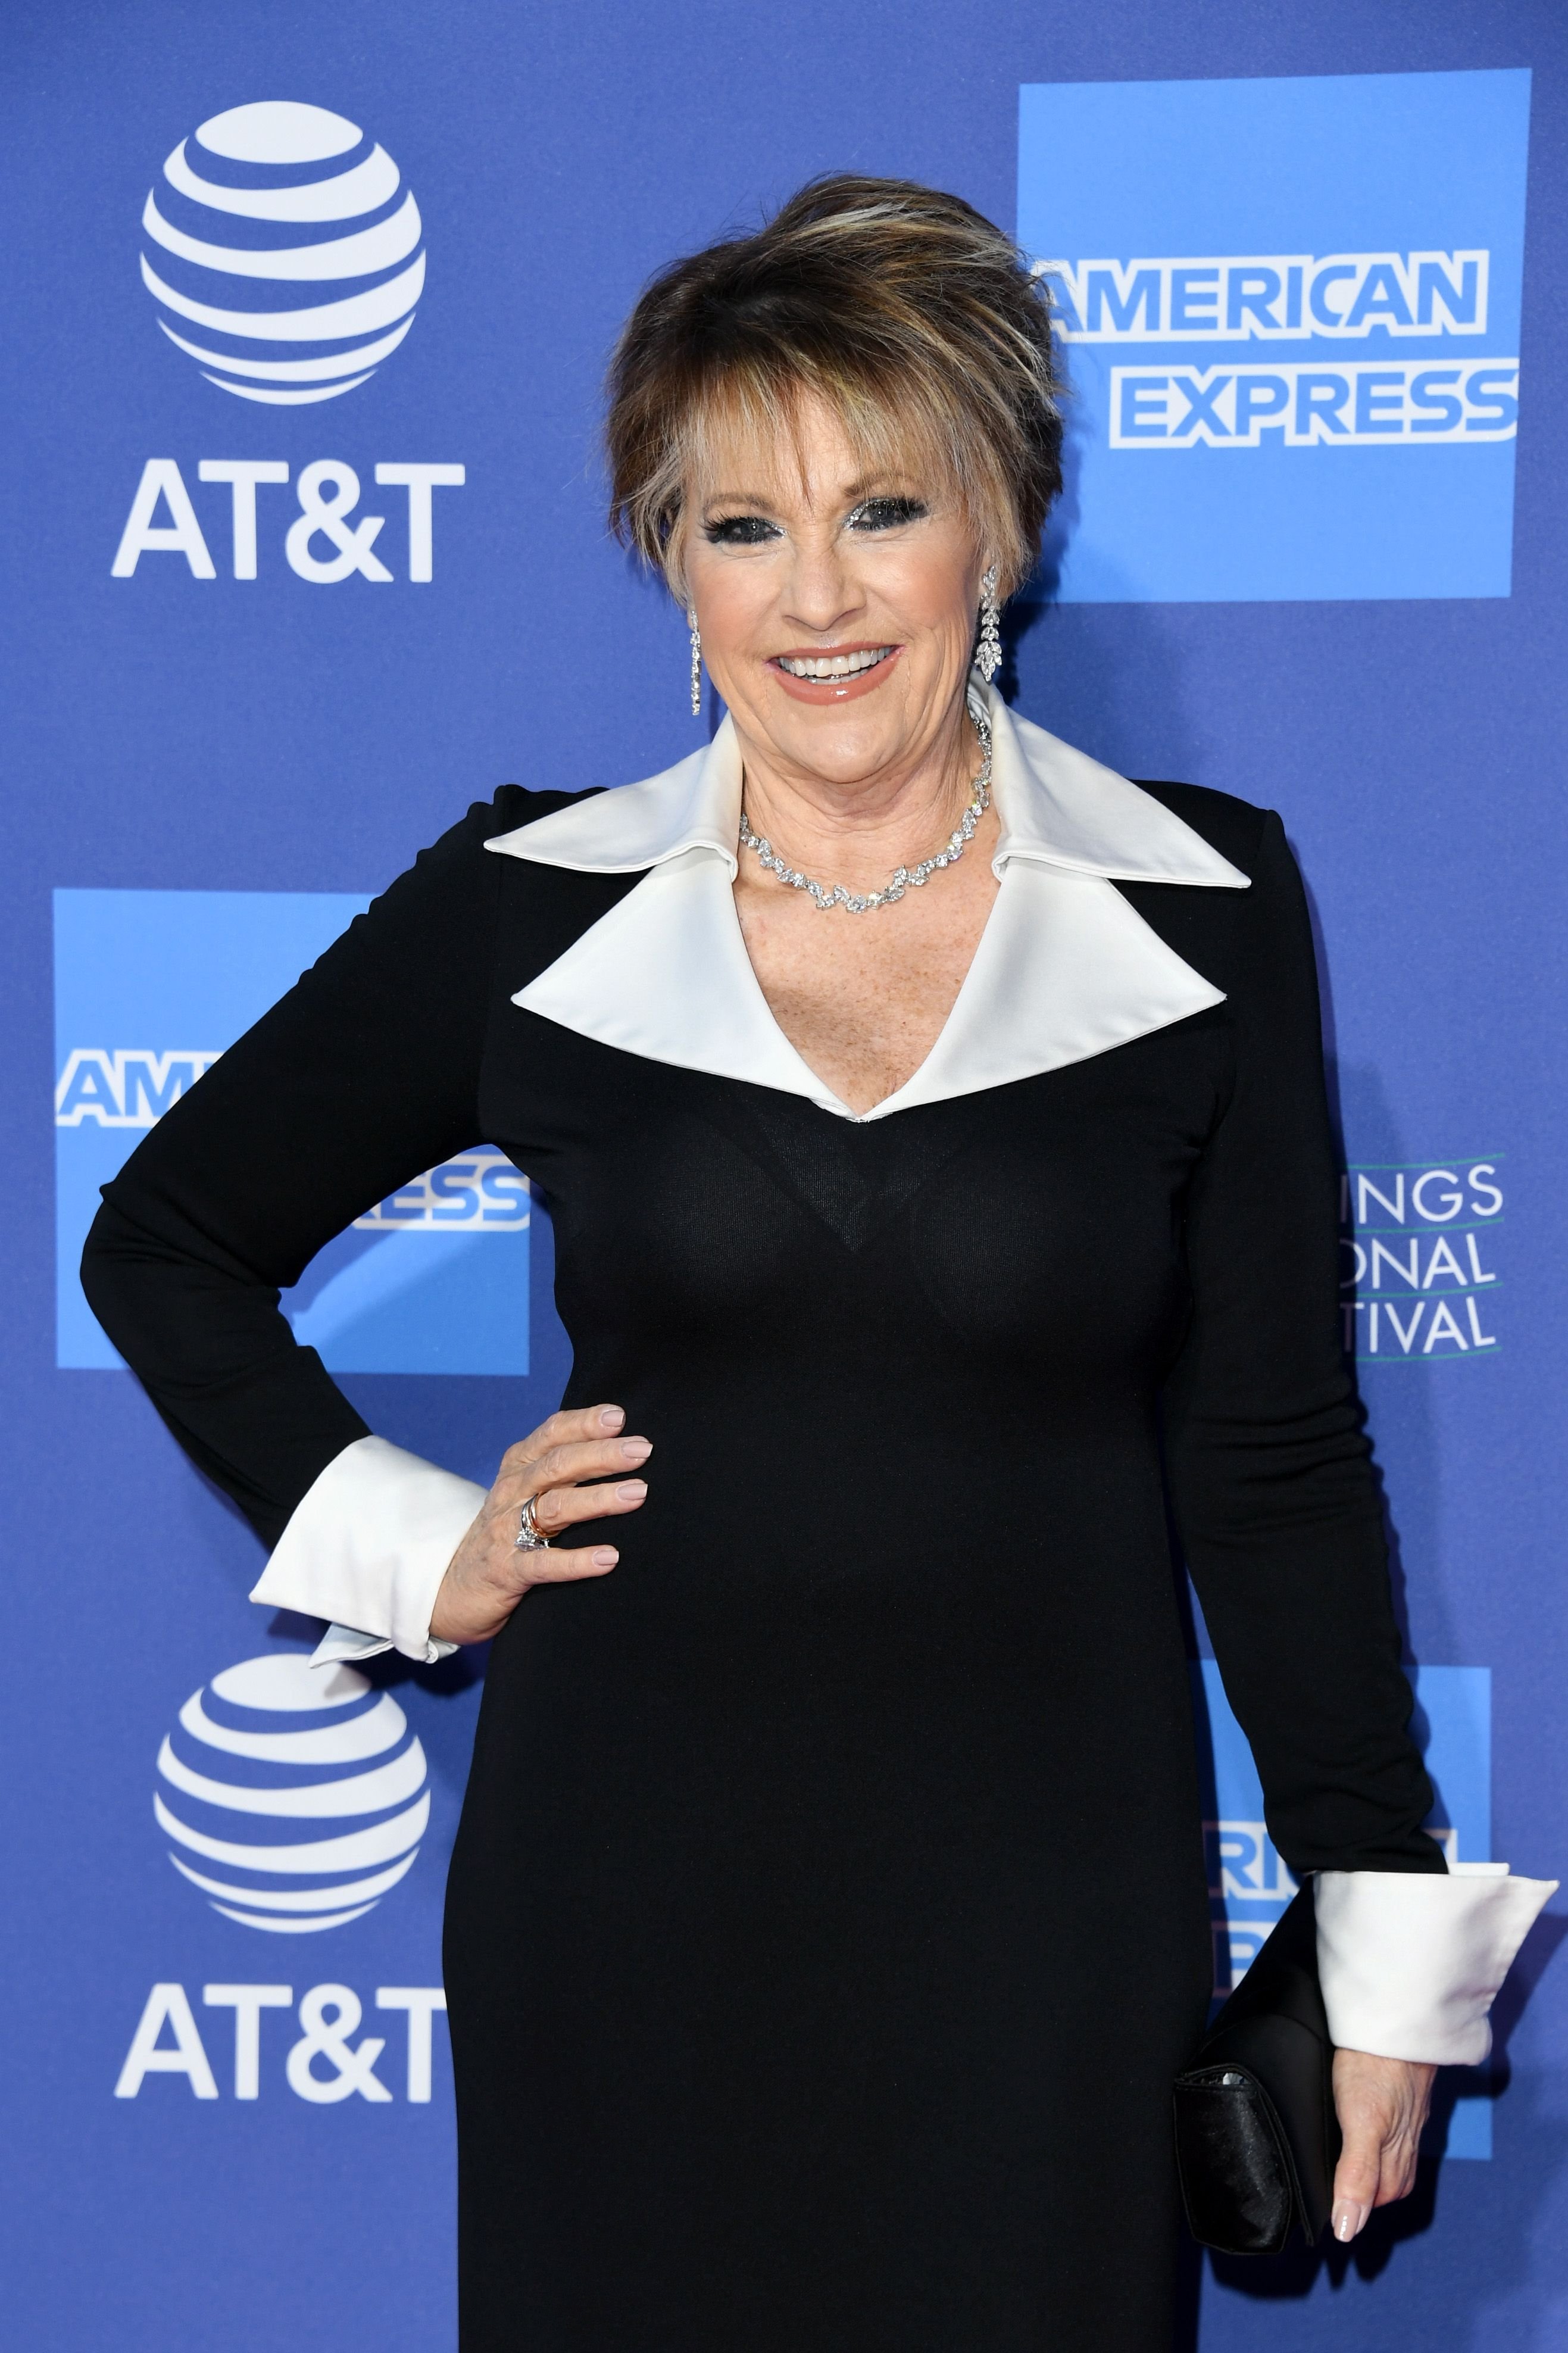 Lorna Luft during the 30th Annual Palm Springs International Film Festival Film Awards Gala at Palm Springs Convention Center on January 3, 2019 in Palm Springs, California. | Source: Getty Images